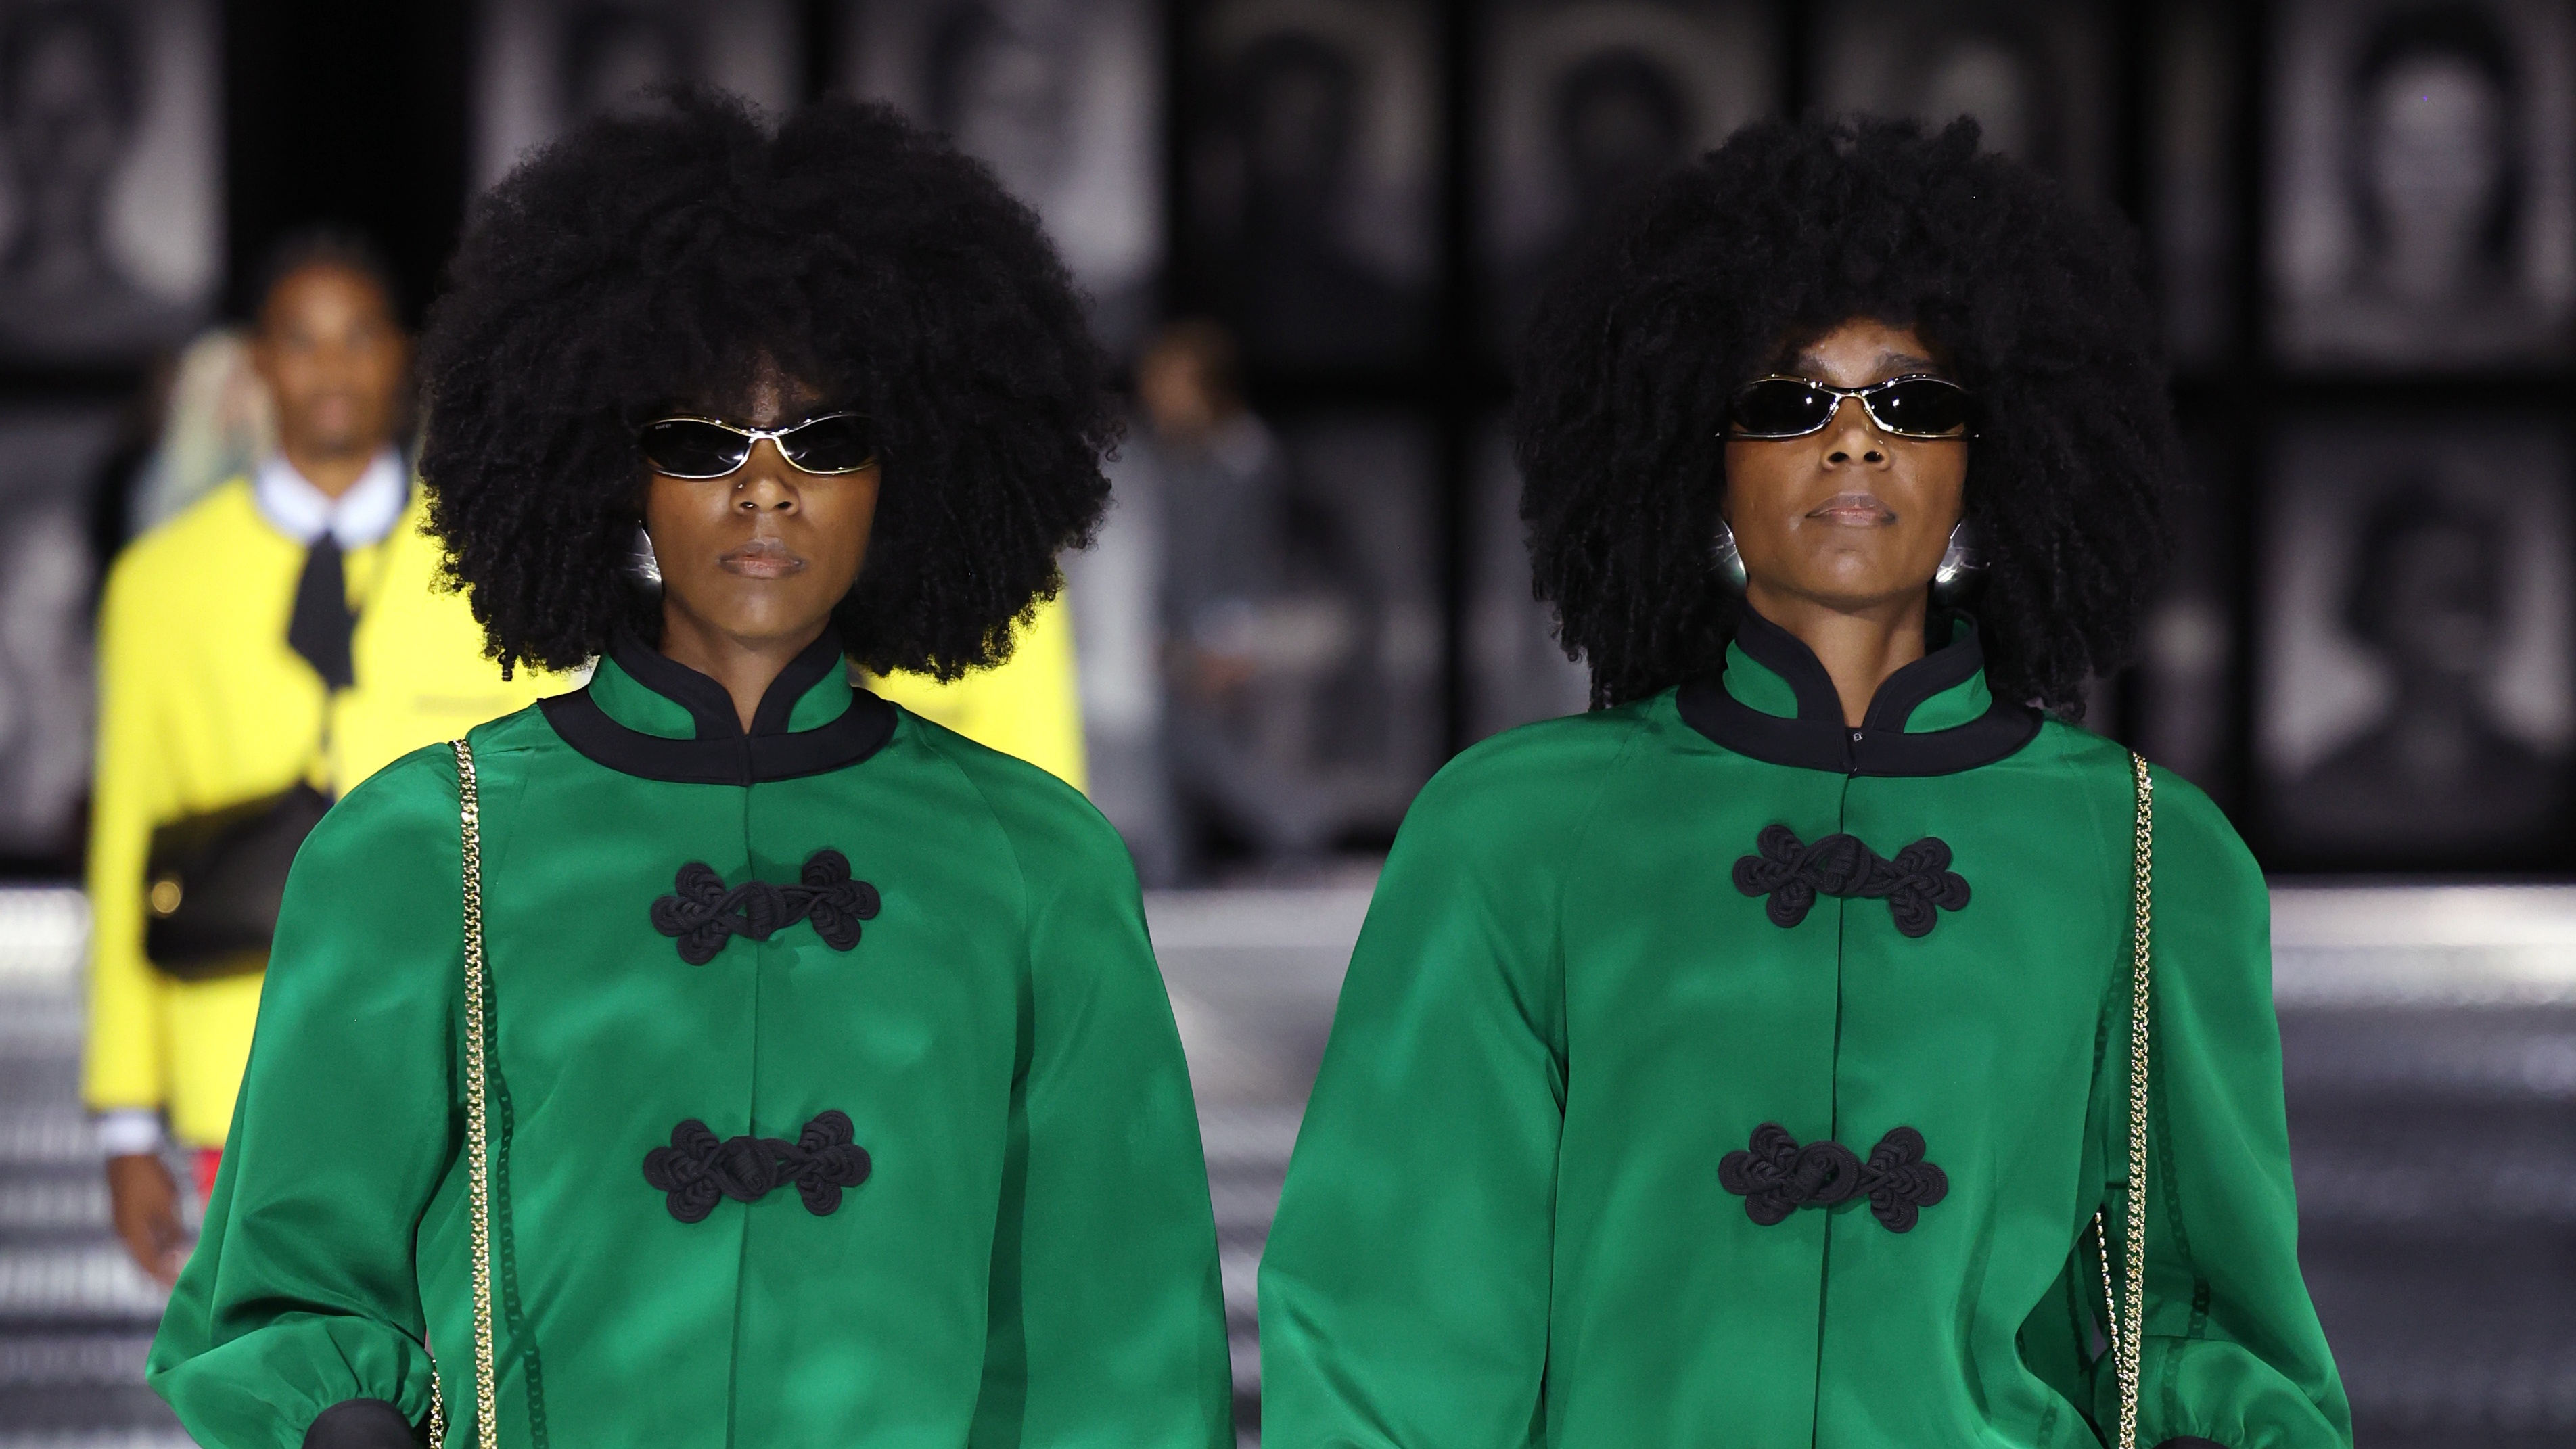 Gucci sends 68 sets of twins down a double runway to steal the